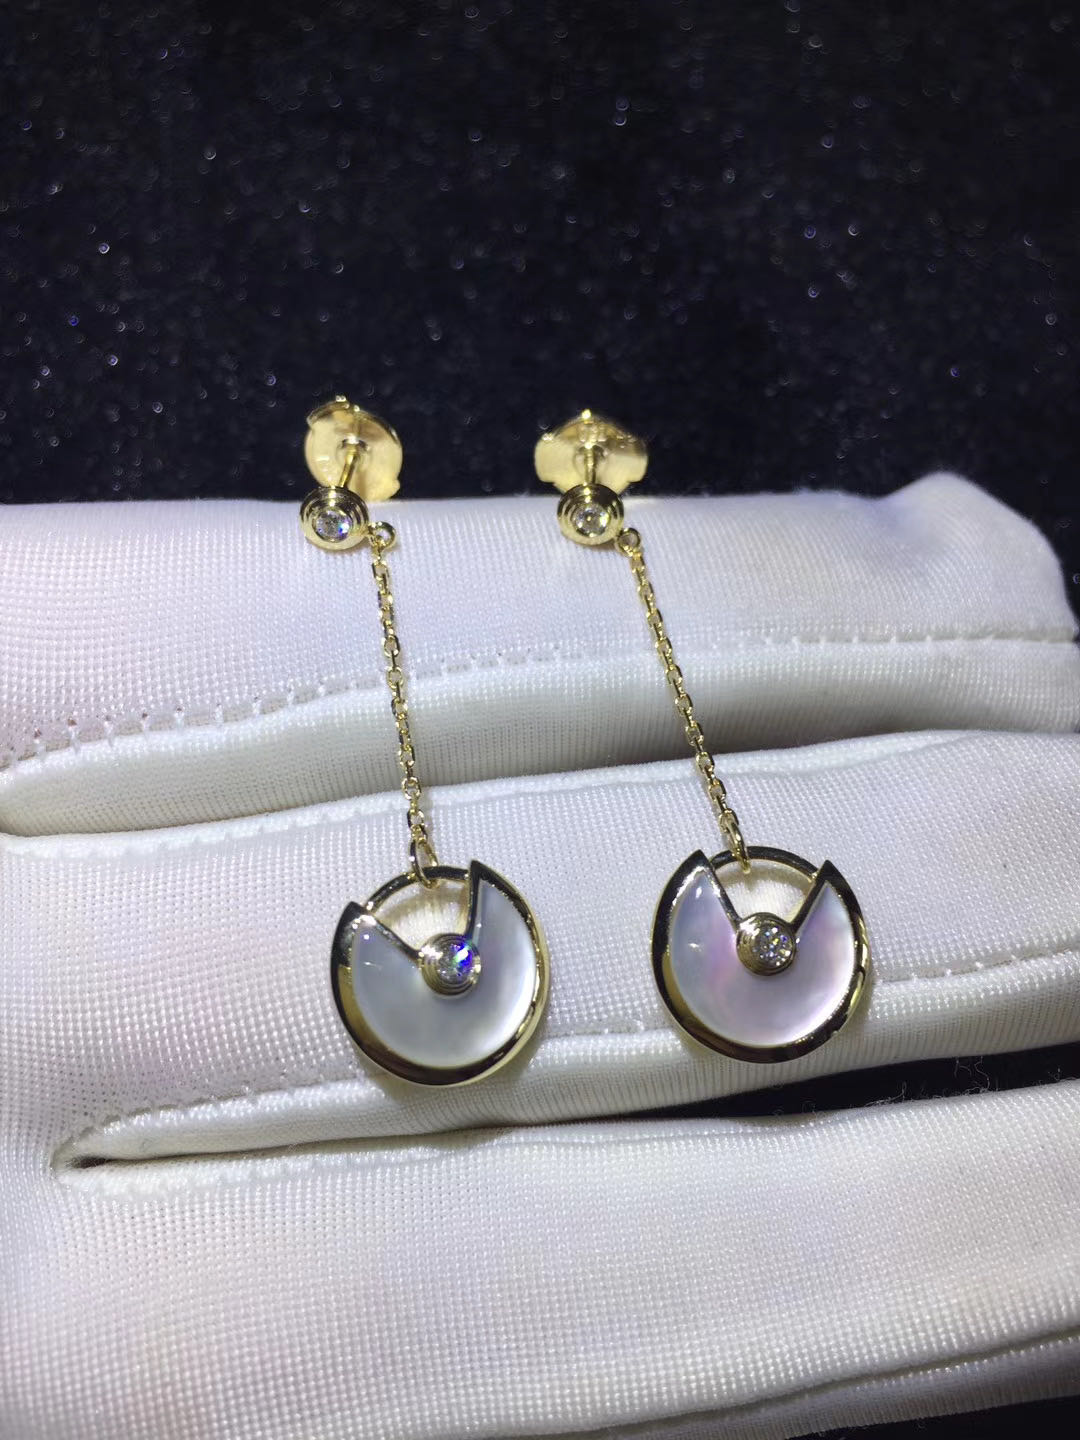 Custom Made Amulette de Cartier Drop Earrings 18k Yellow Gold with Mother of Pearl set with 4 Diamonds